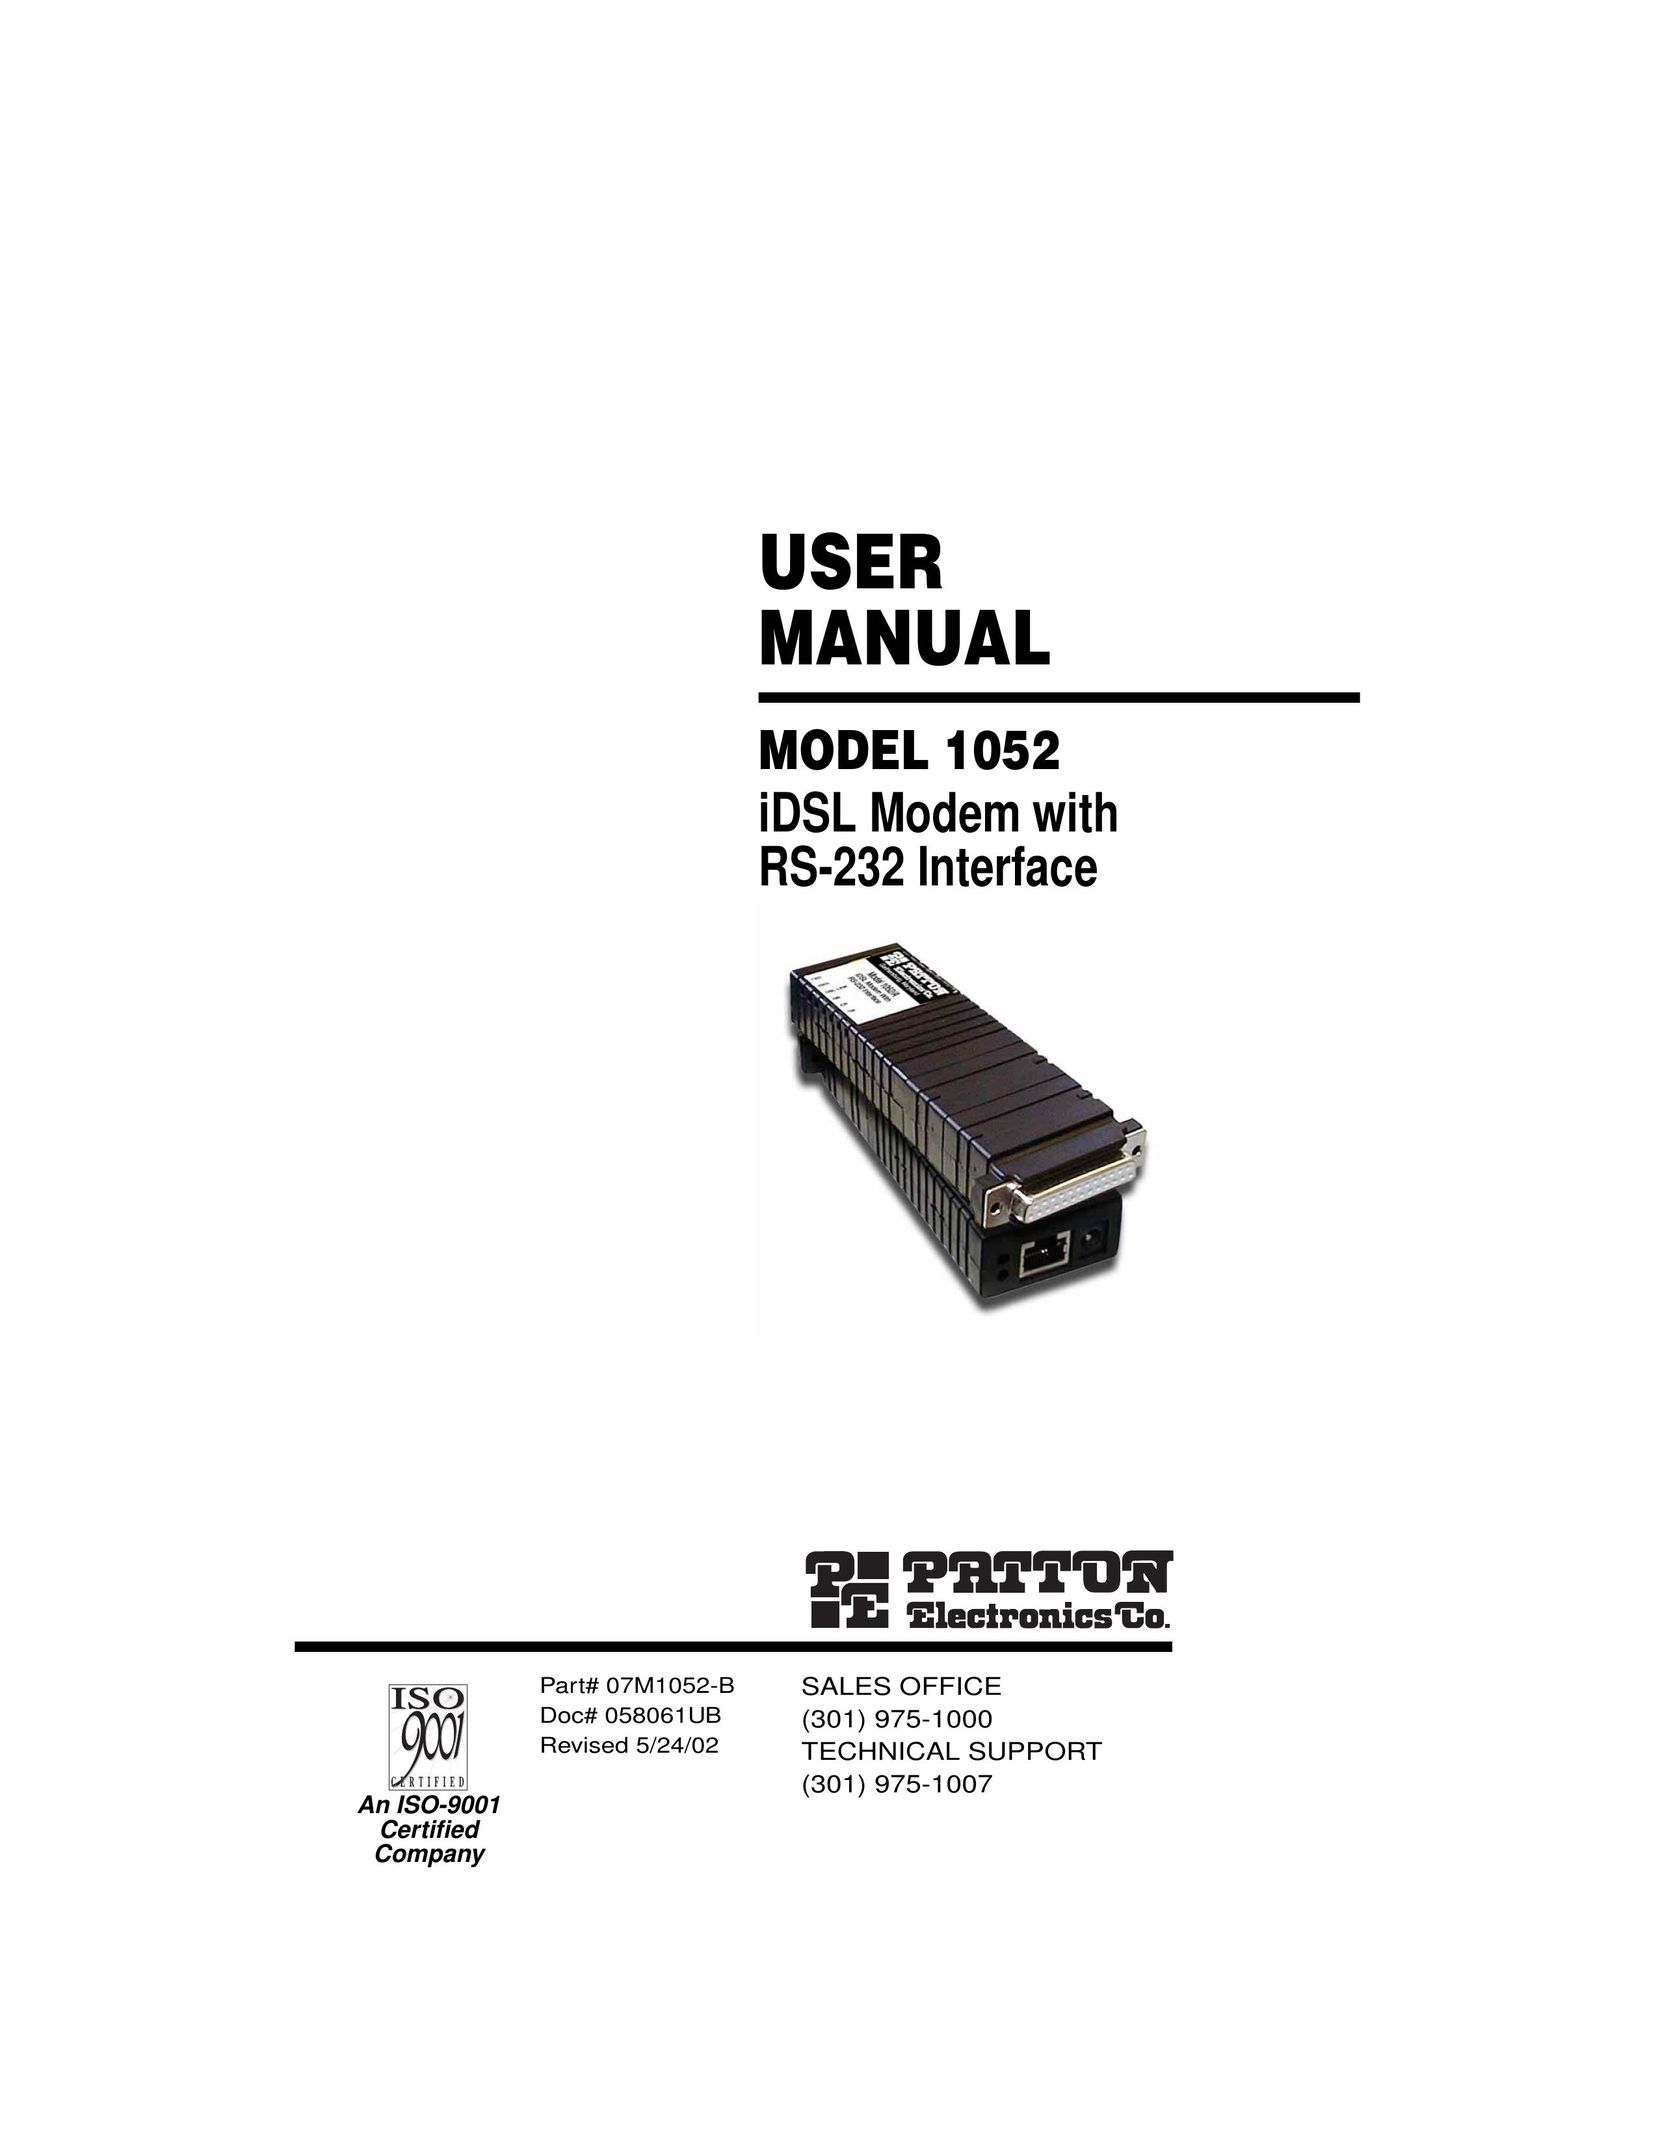 Patton electronic 1052 Network Card User Manual (Page 1)